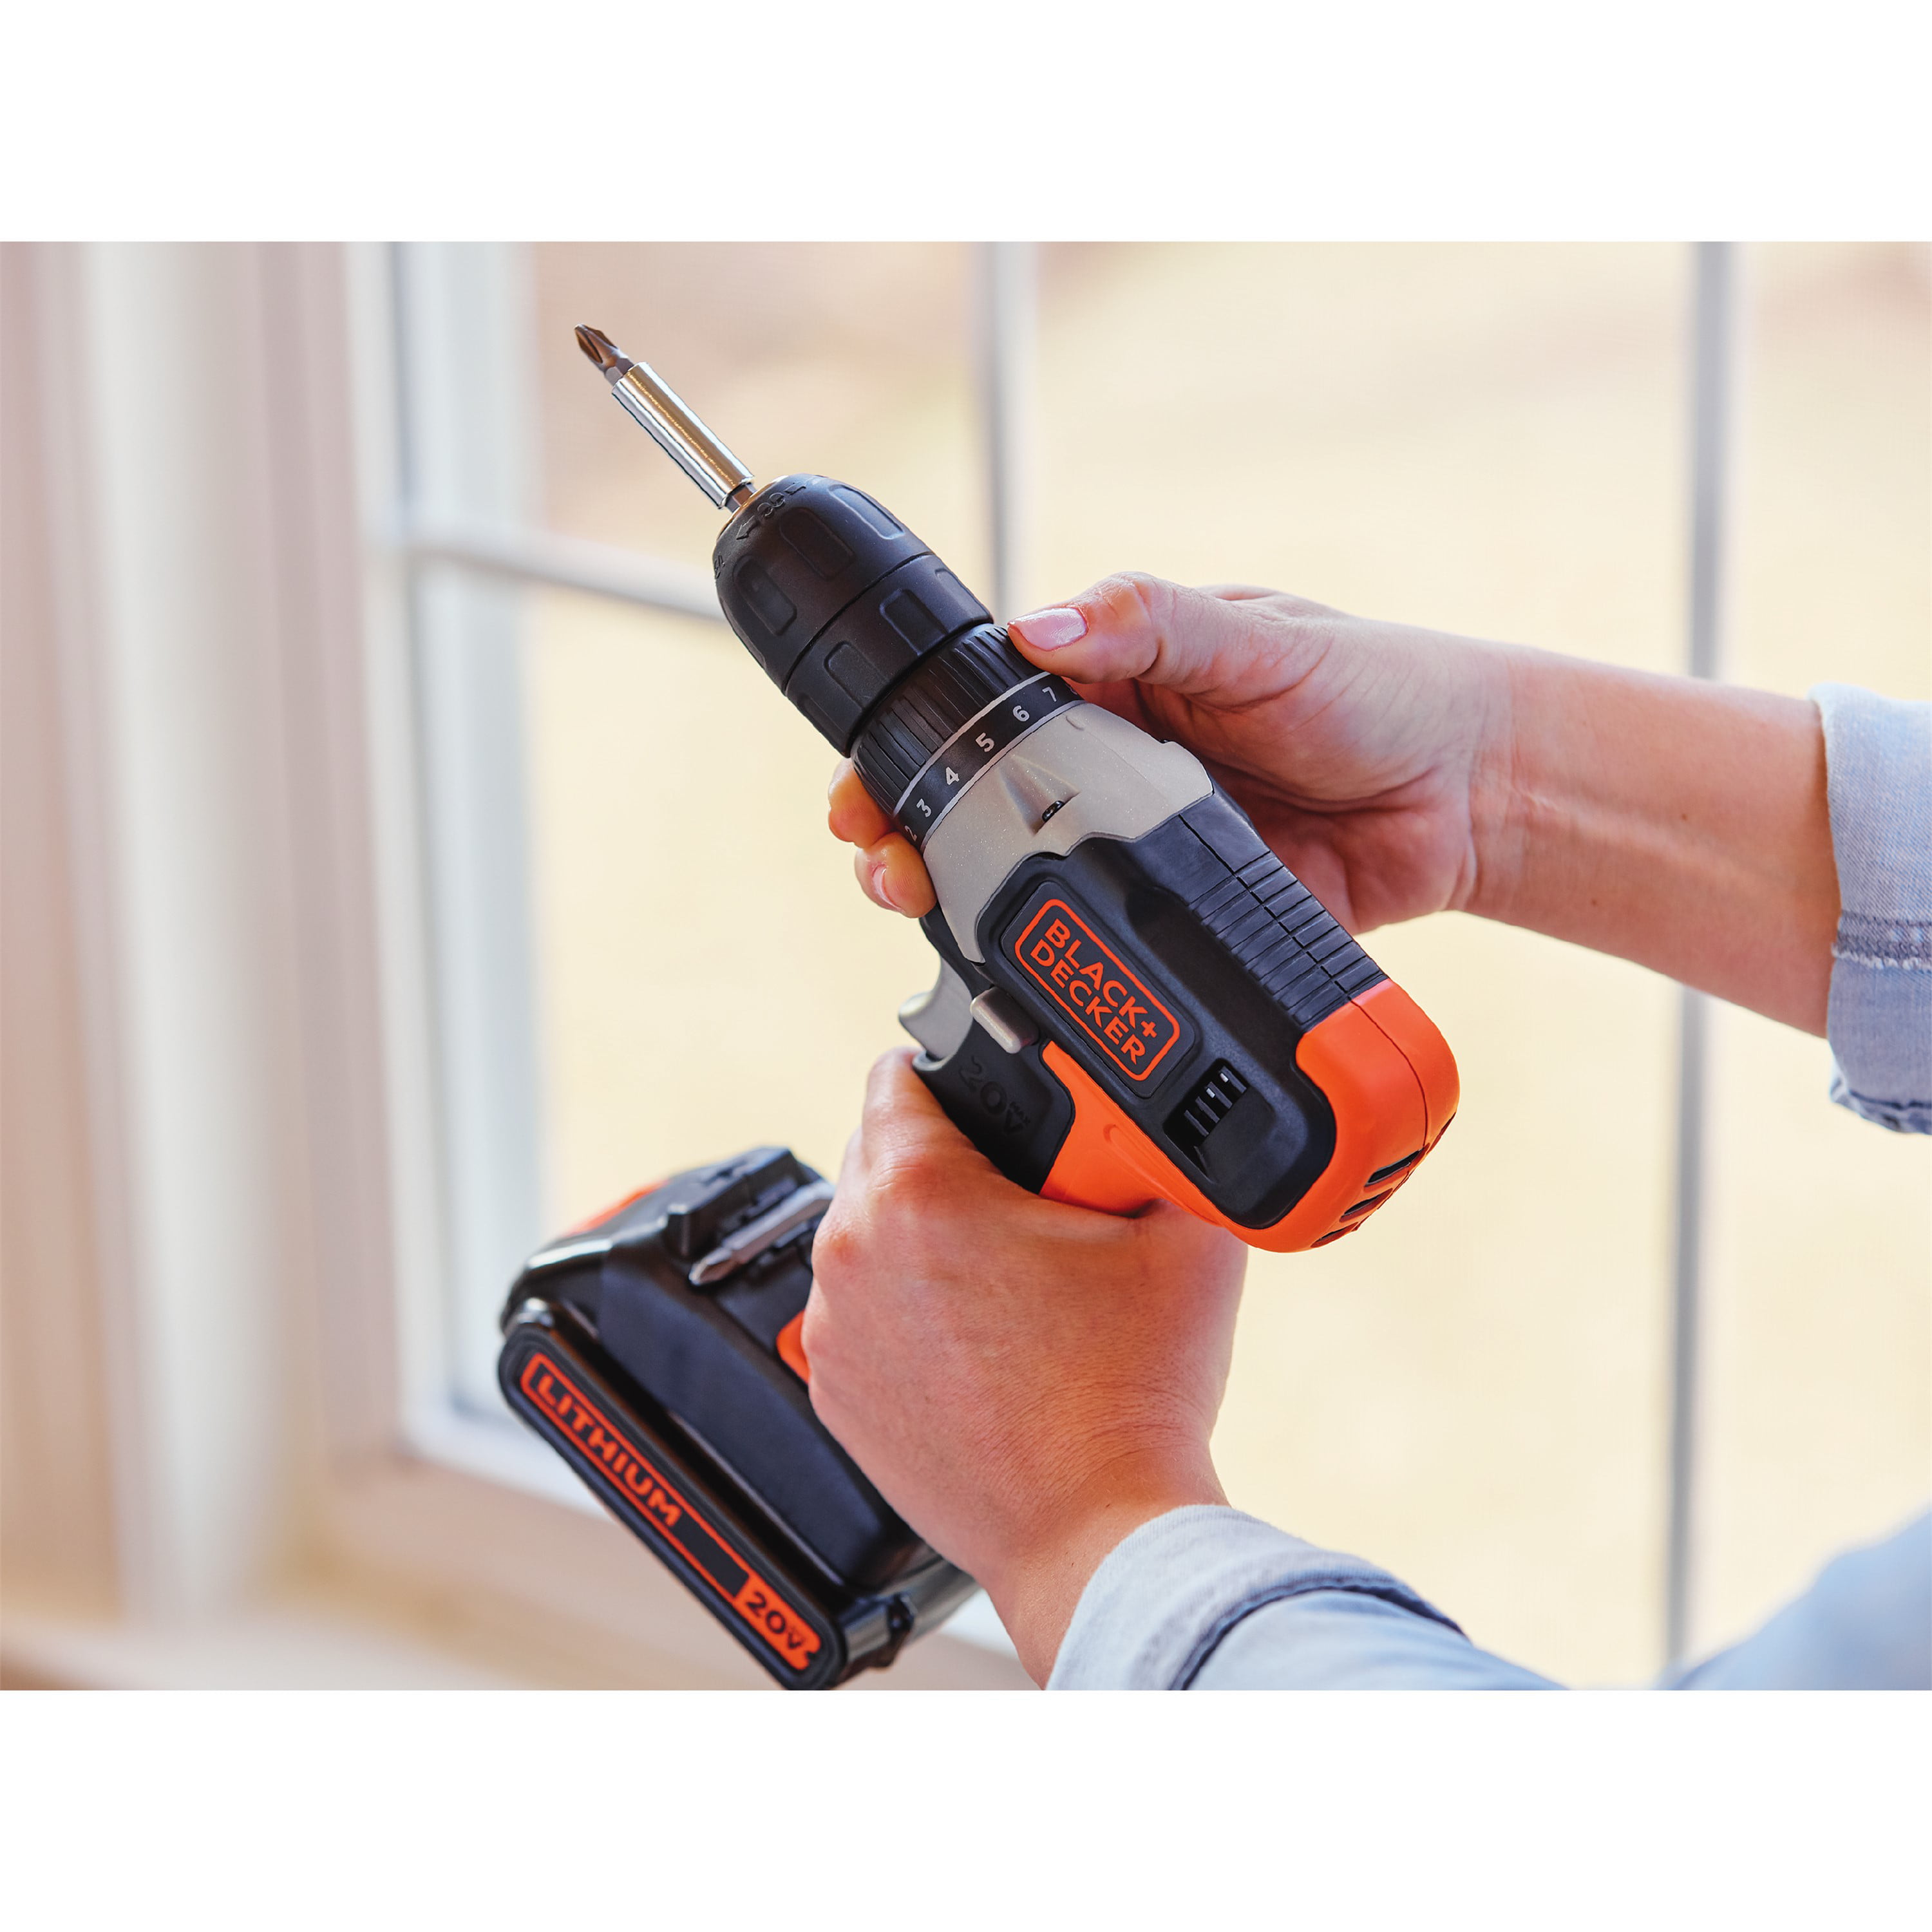  BLACK+DECKER 20V MAX* POWERCONNECT Cordless Drill/Driver + 44  pc. Home Project Kit (LDX50PK) : Tools & Home Improvement